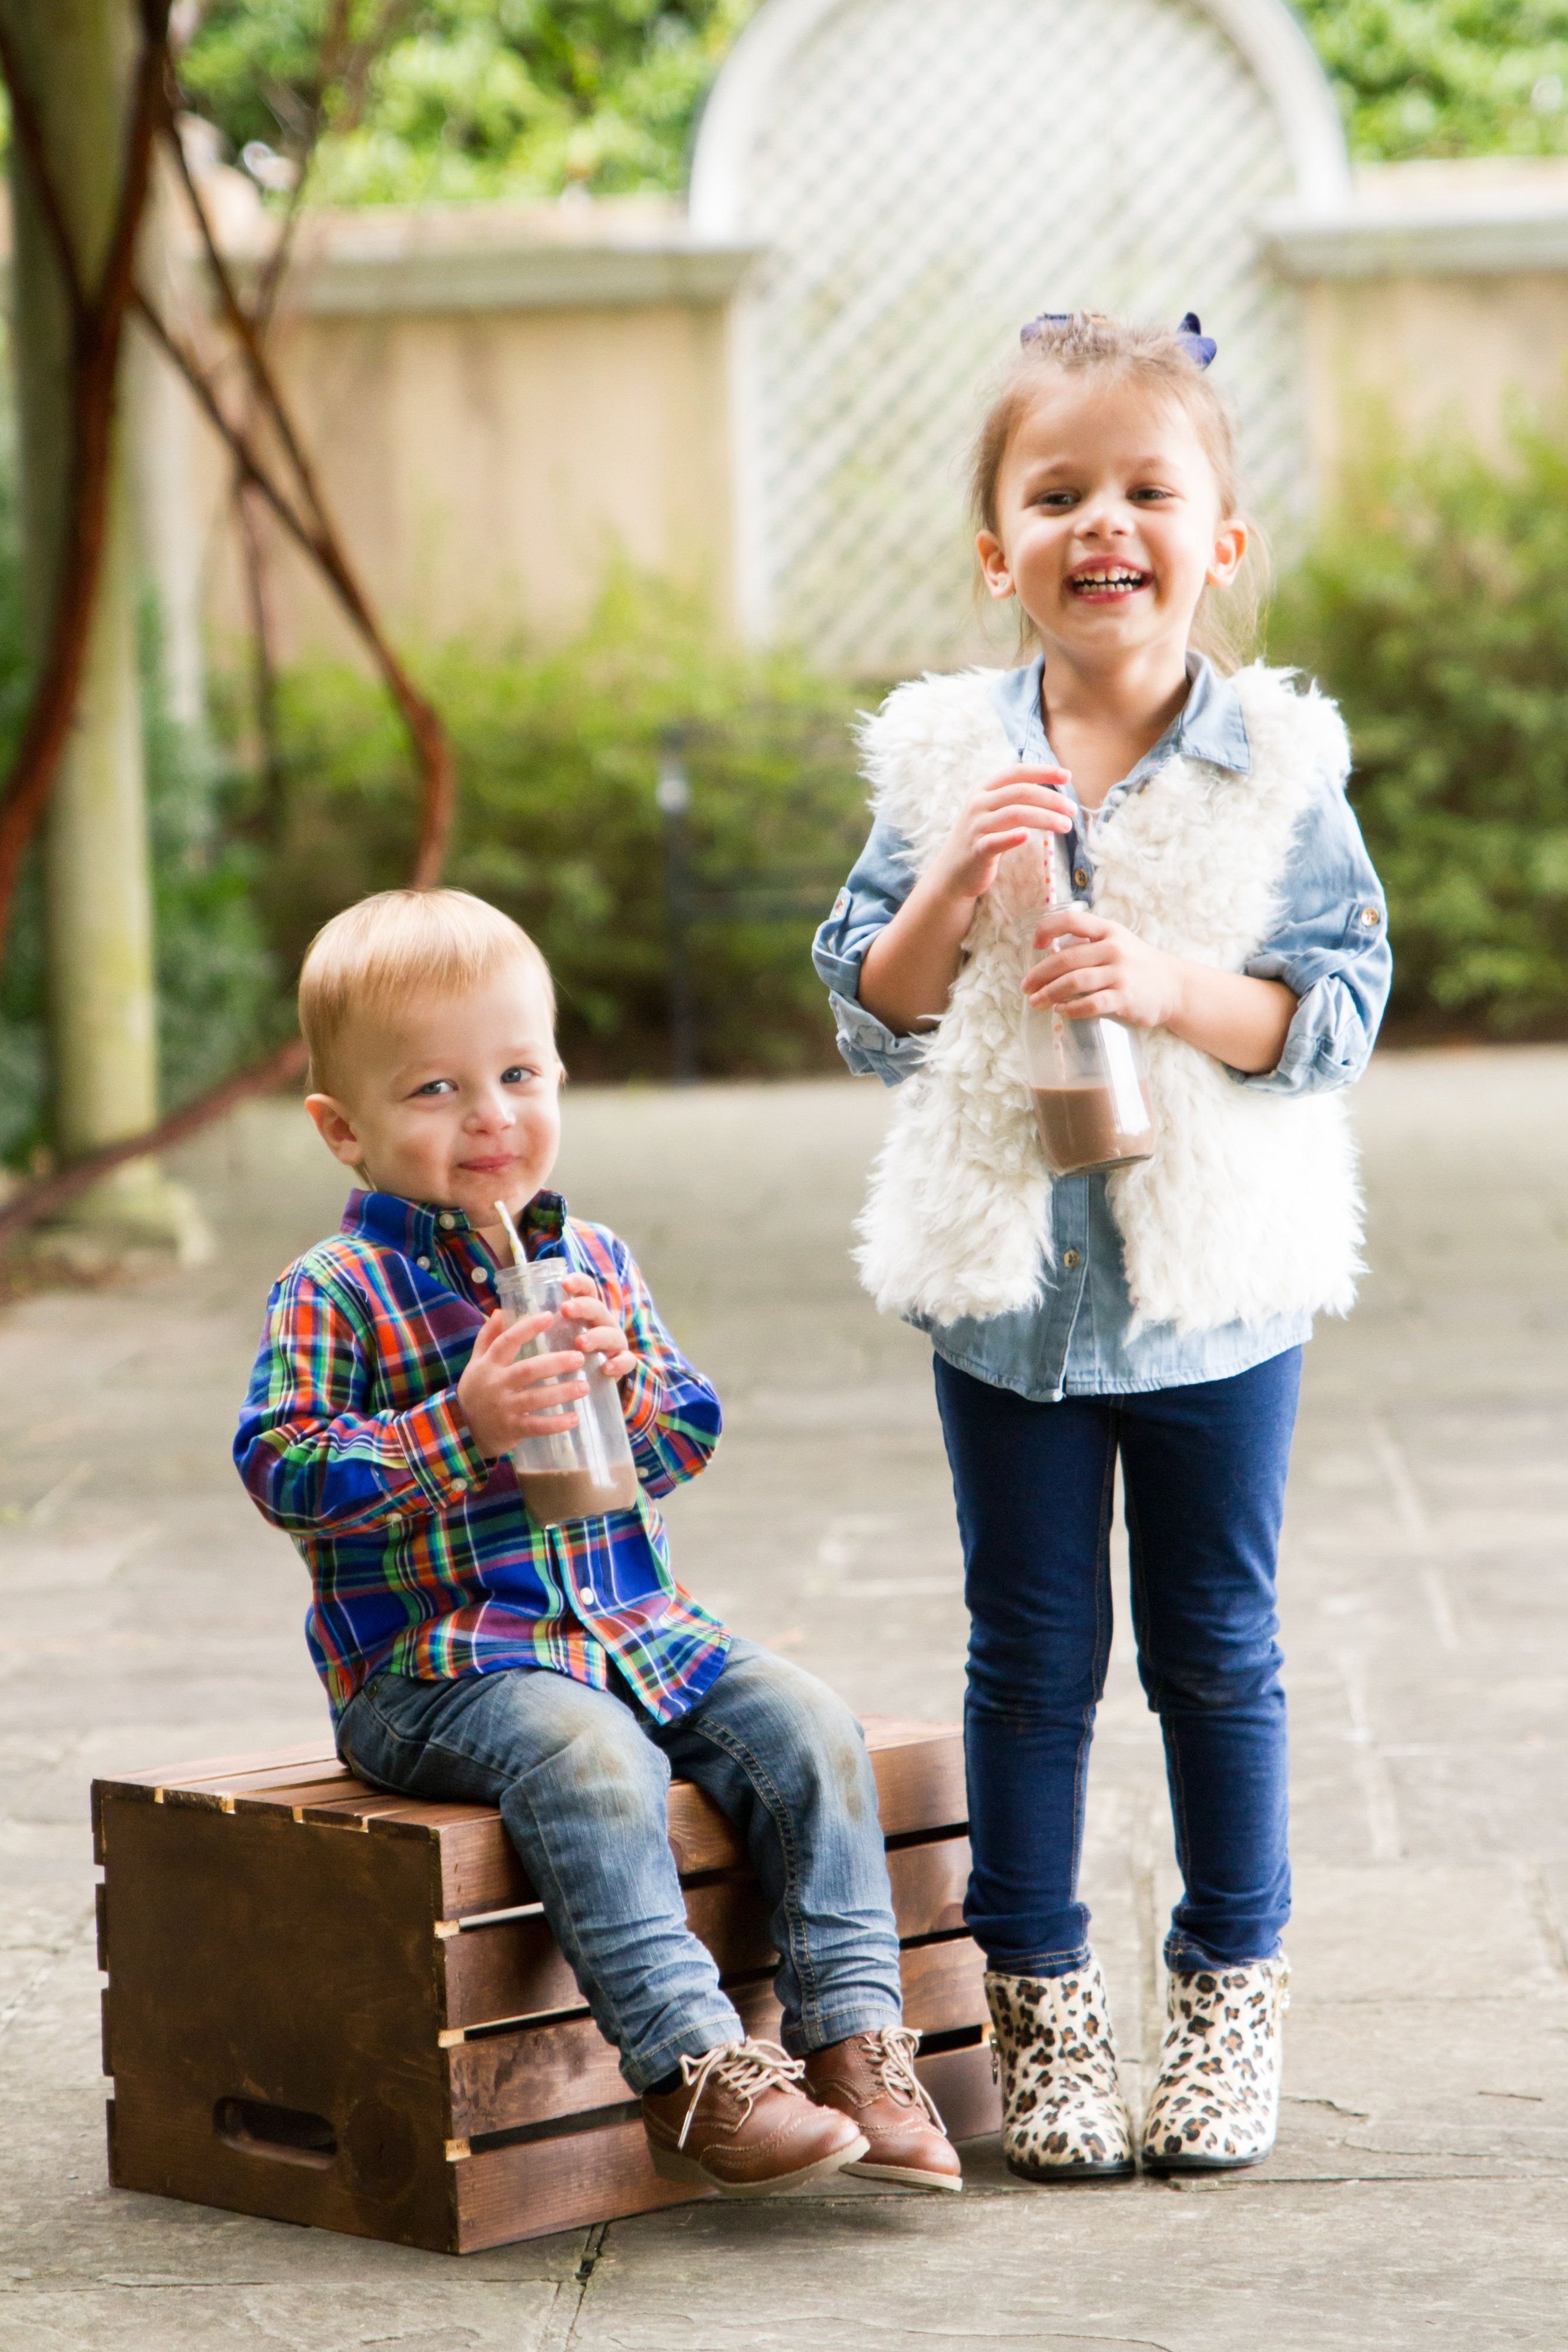 10 Amazing Brother And Sister Picture Ideas toddler kid photograhy fall photo ideas brother sister fall 2022